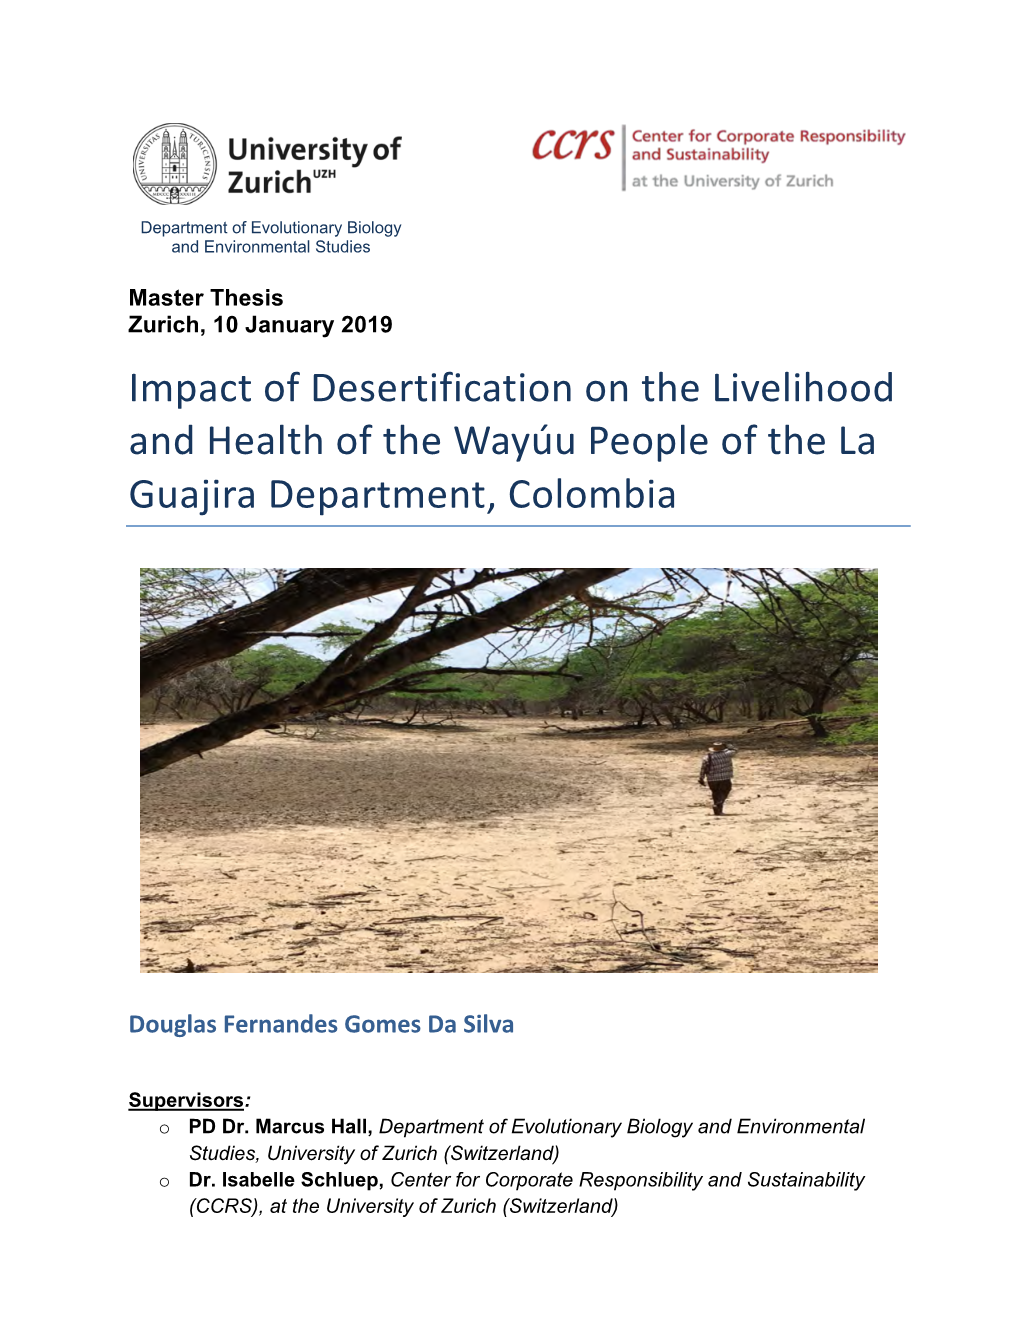 Impact of Desertification on the Livelihood and Health of the Wayúu People of the La Guajira Department, Colombia